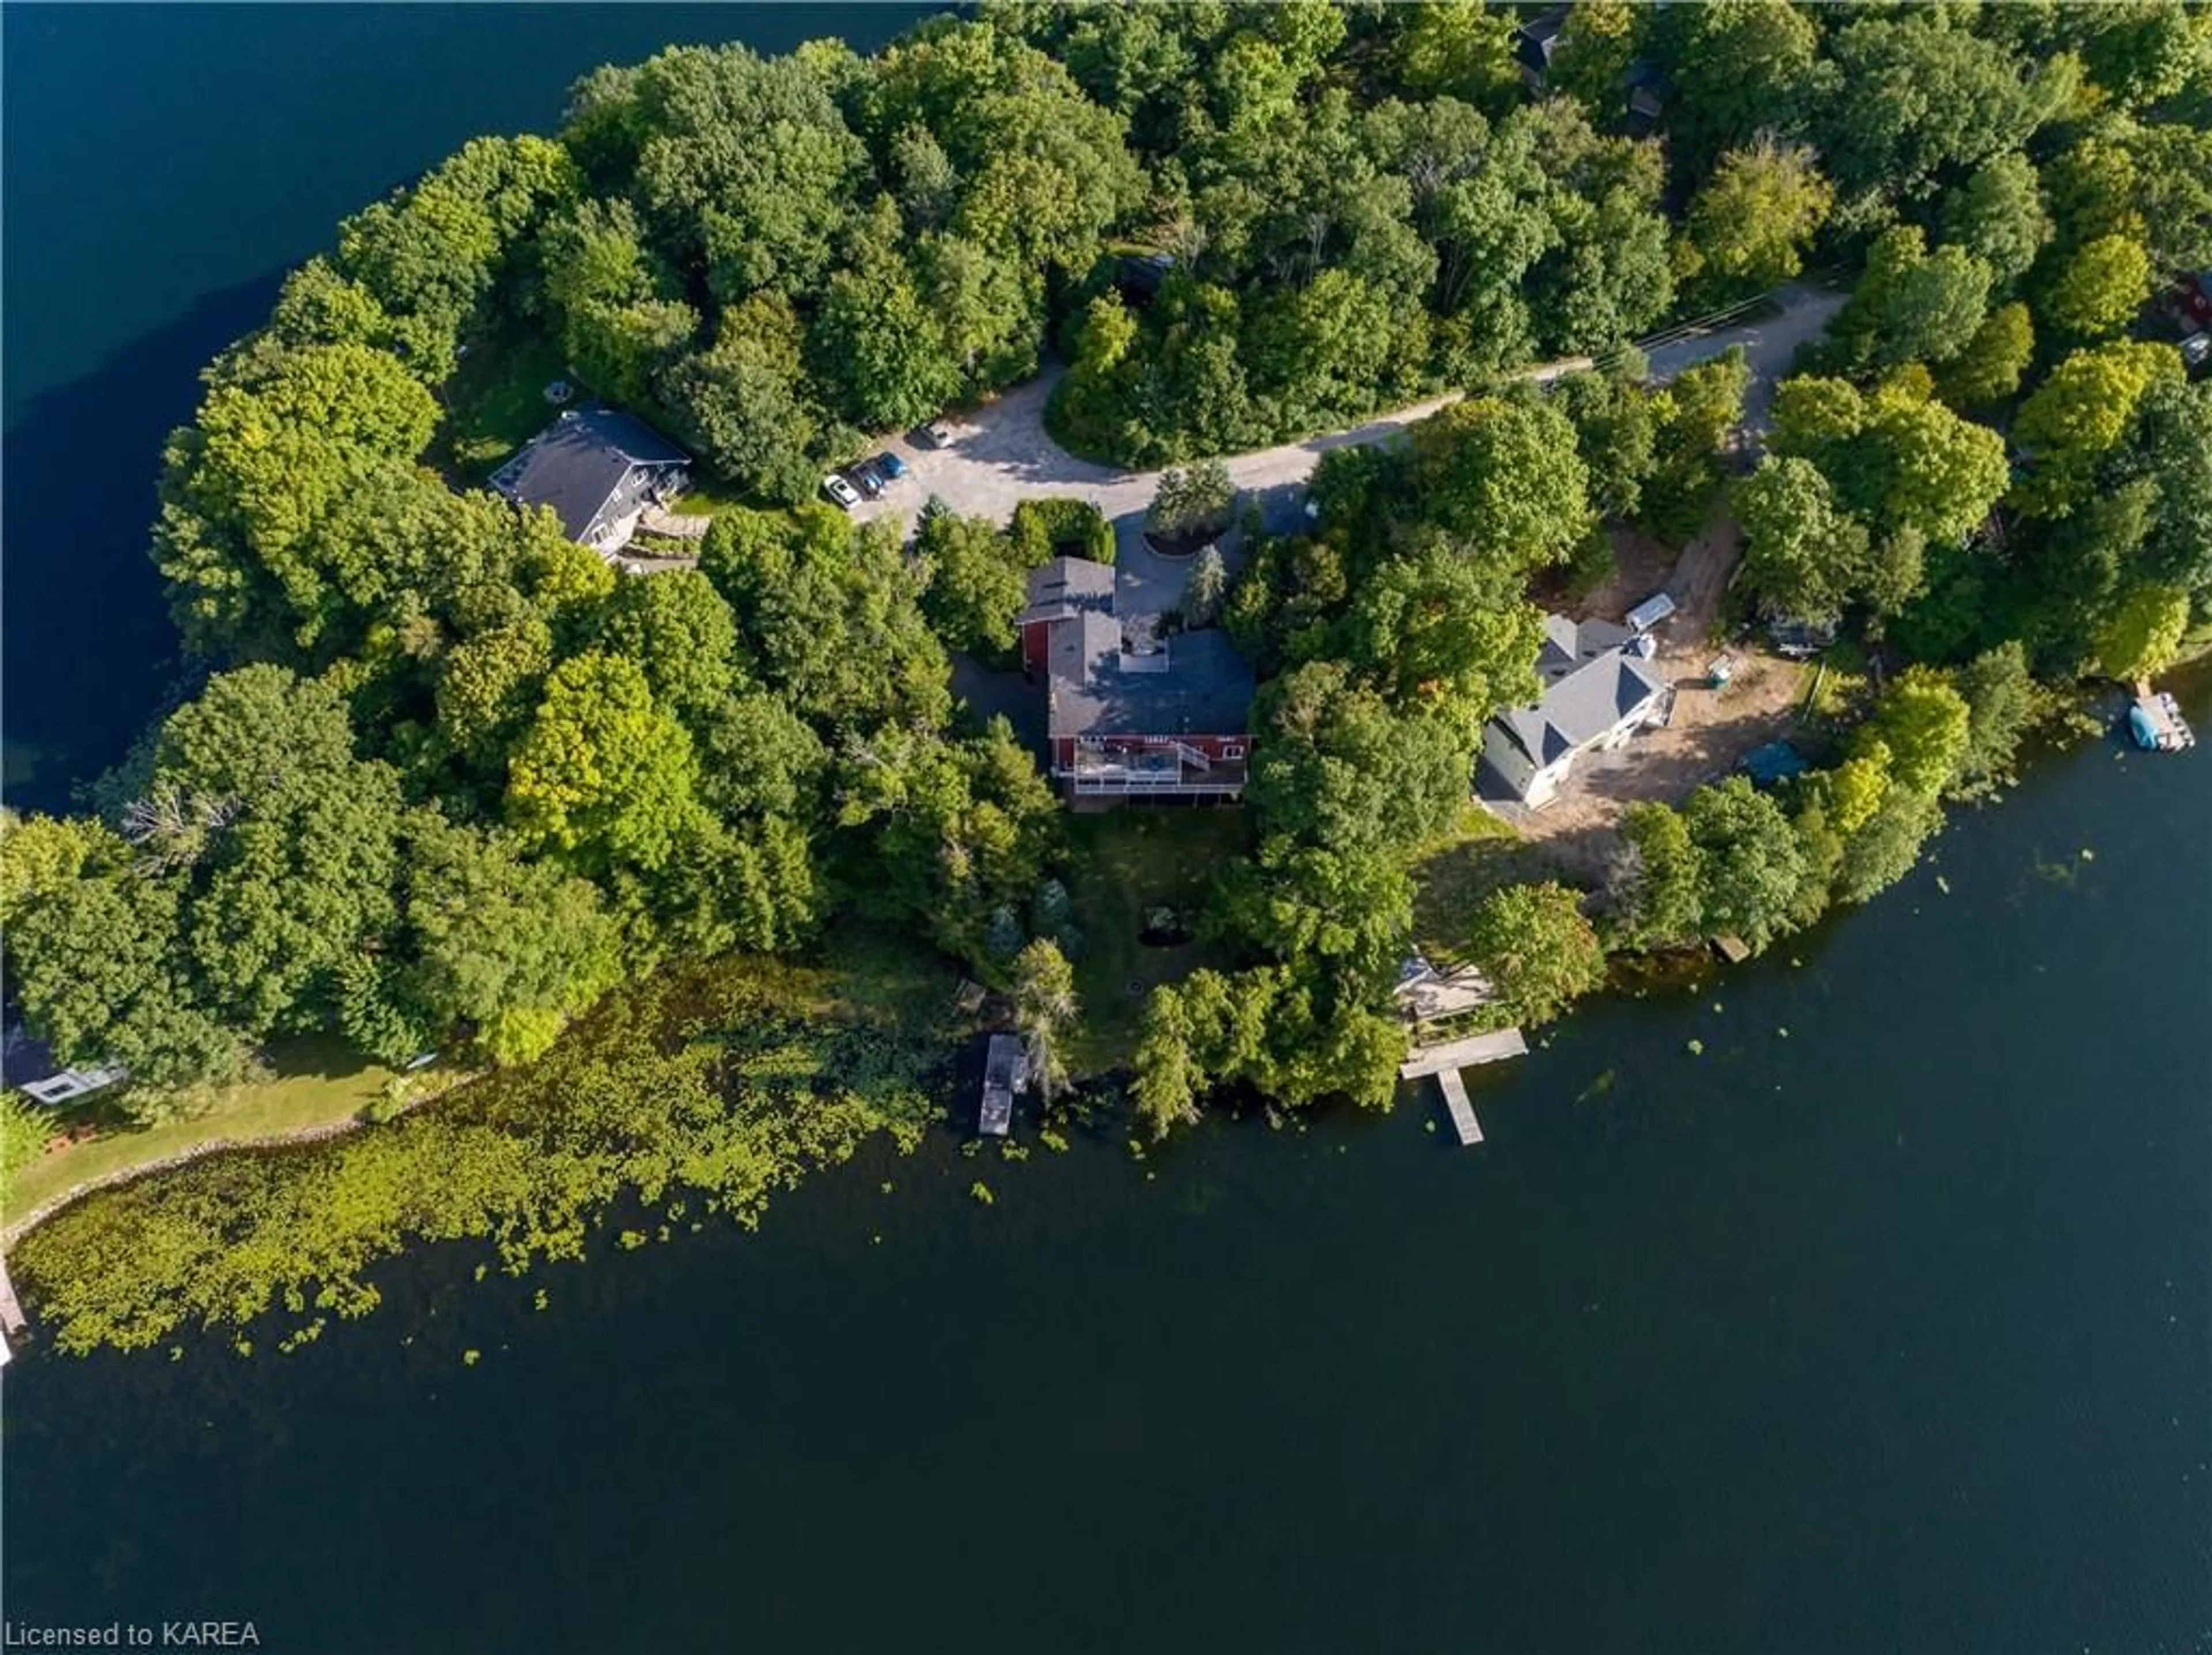 Lakeview for 5525 Rideau Rd, Seeleys Bay Ontario K0H 2N0